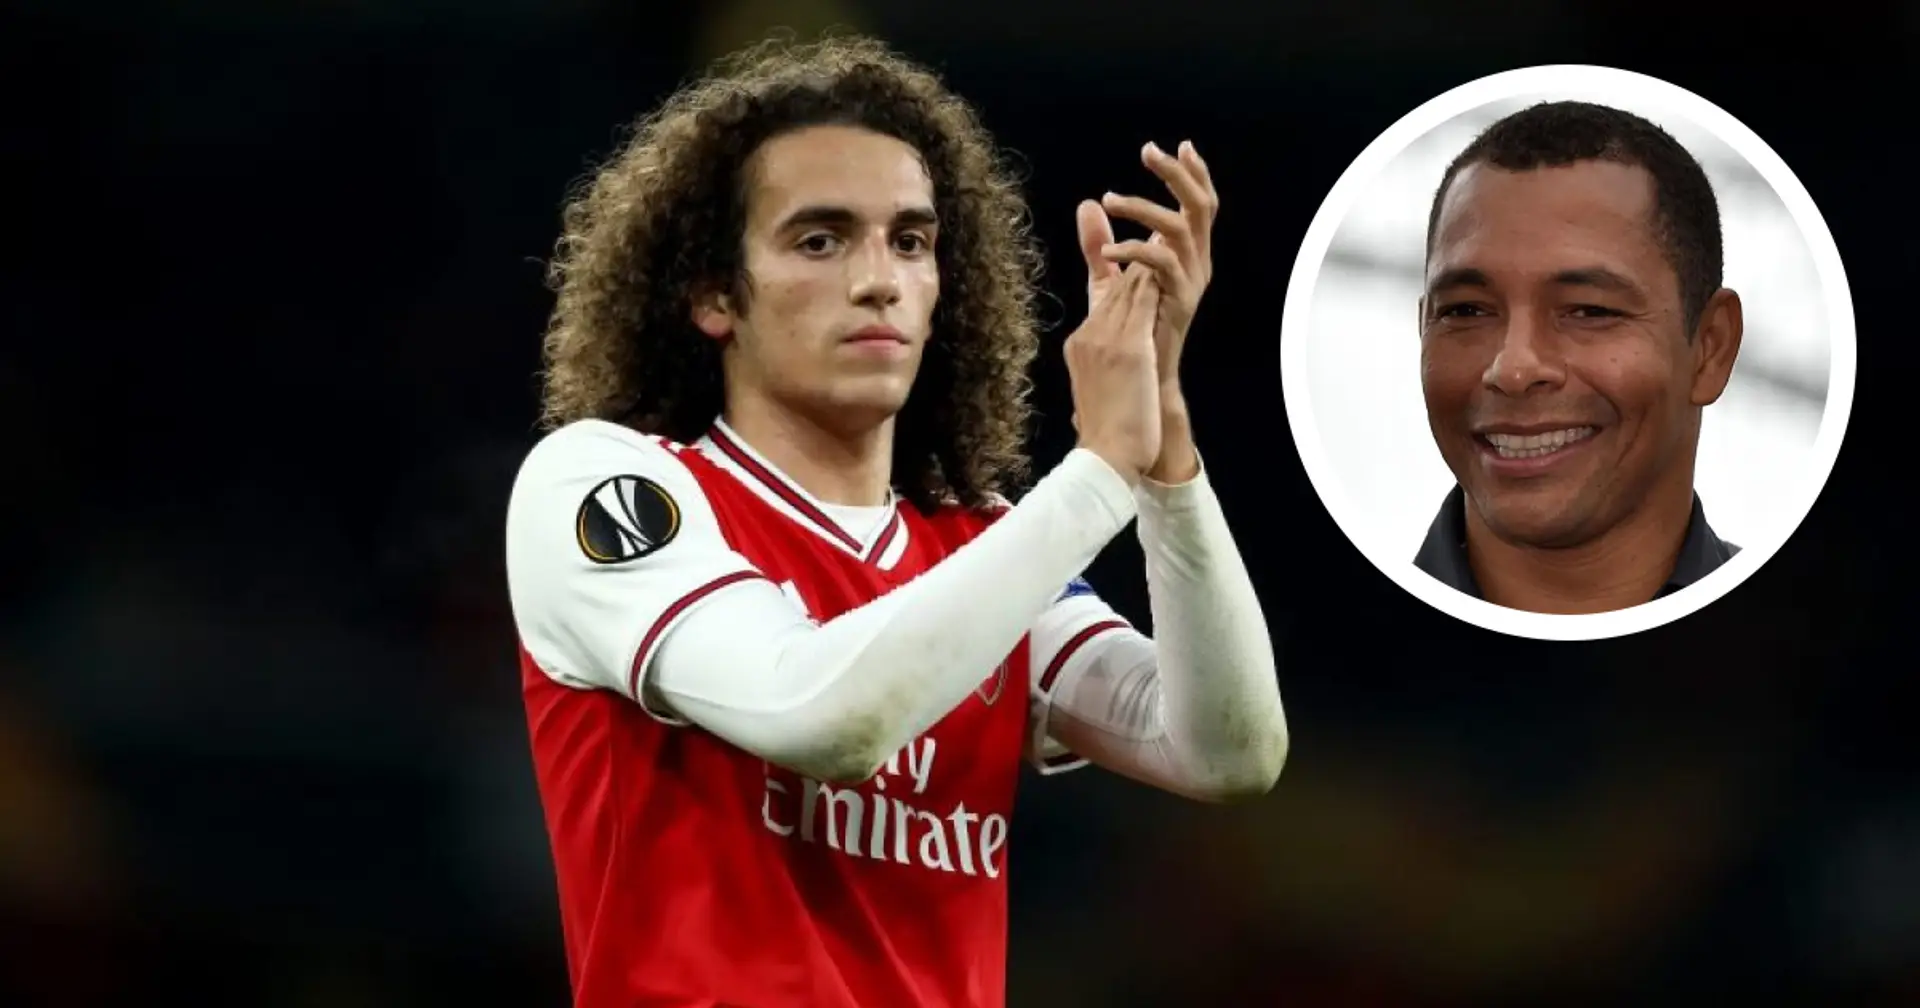 Gilberto Silva urges Guendouzi to mind his temper and decide which position he wants to play